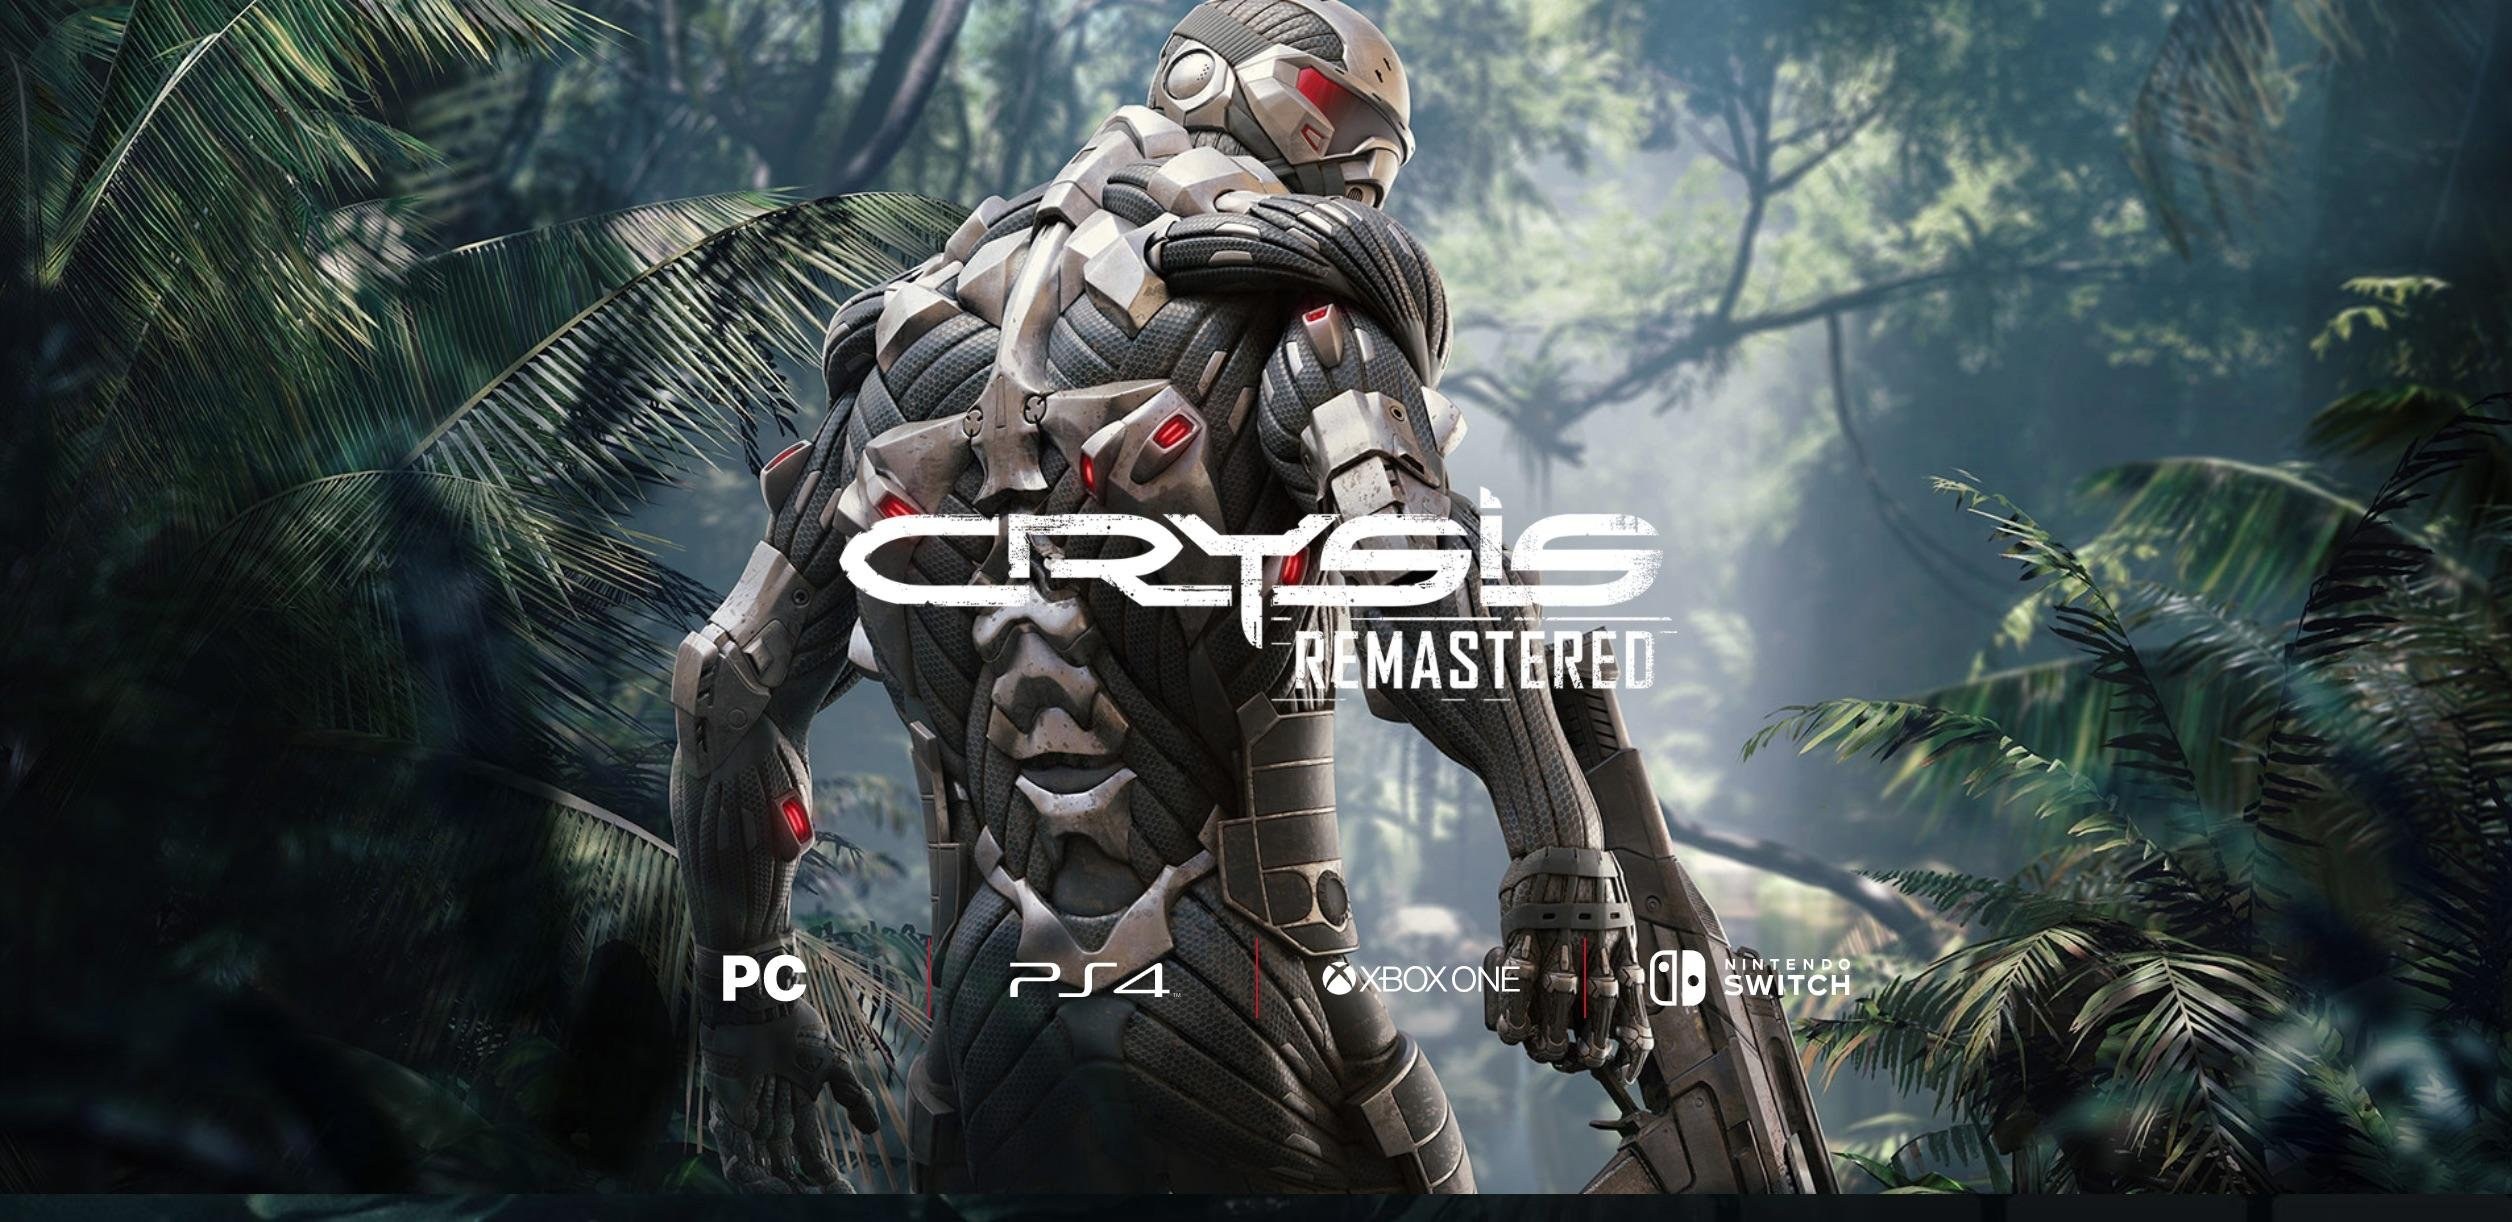 Crysis Remastered coming to all platforms, including Switch